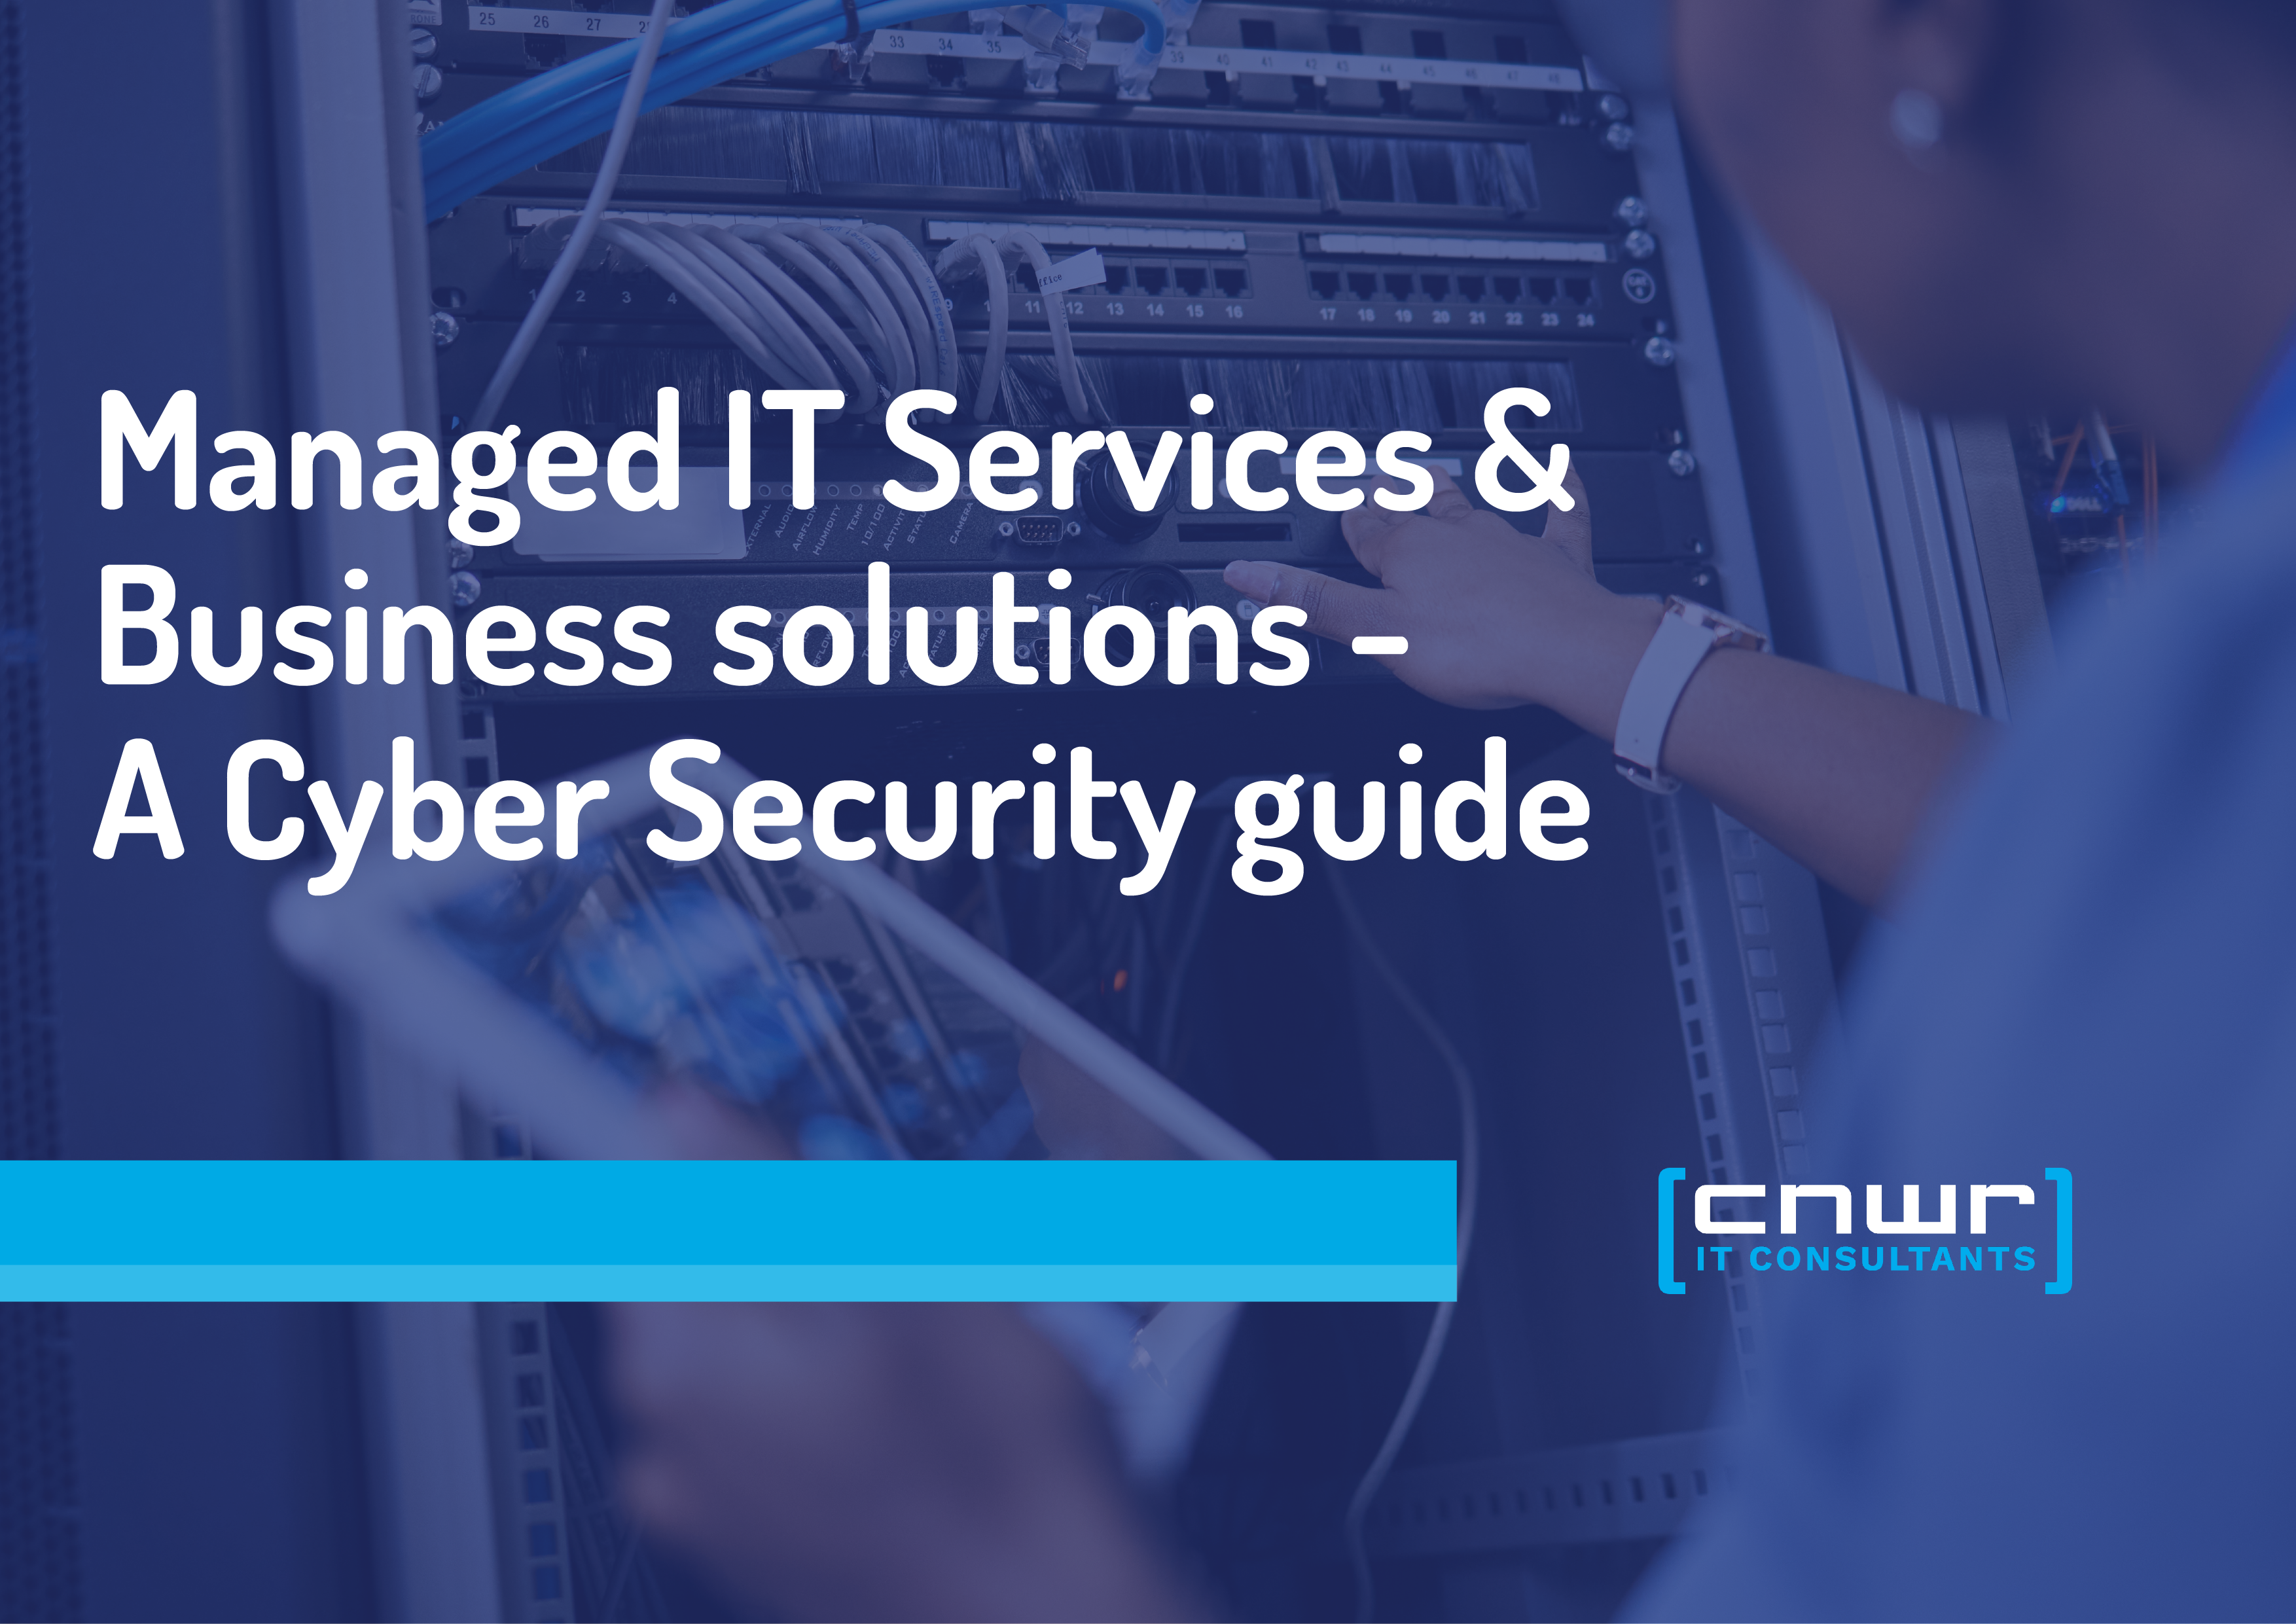 Managed IT Services & Business solutions - A Cyber Security guide